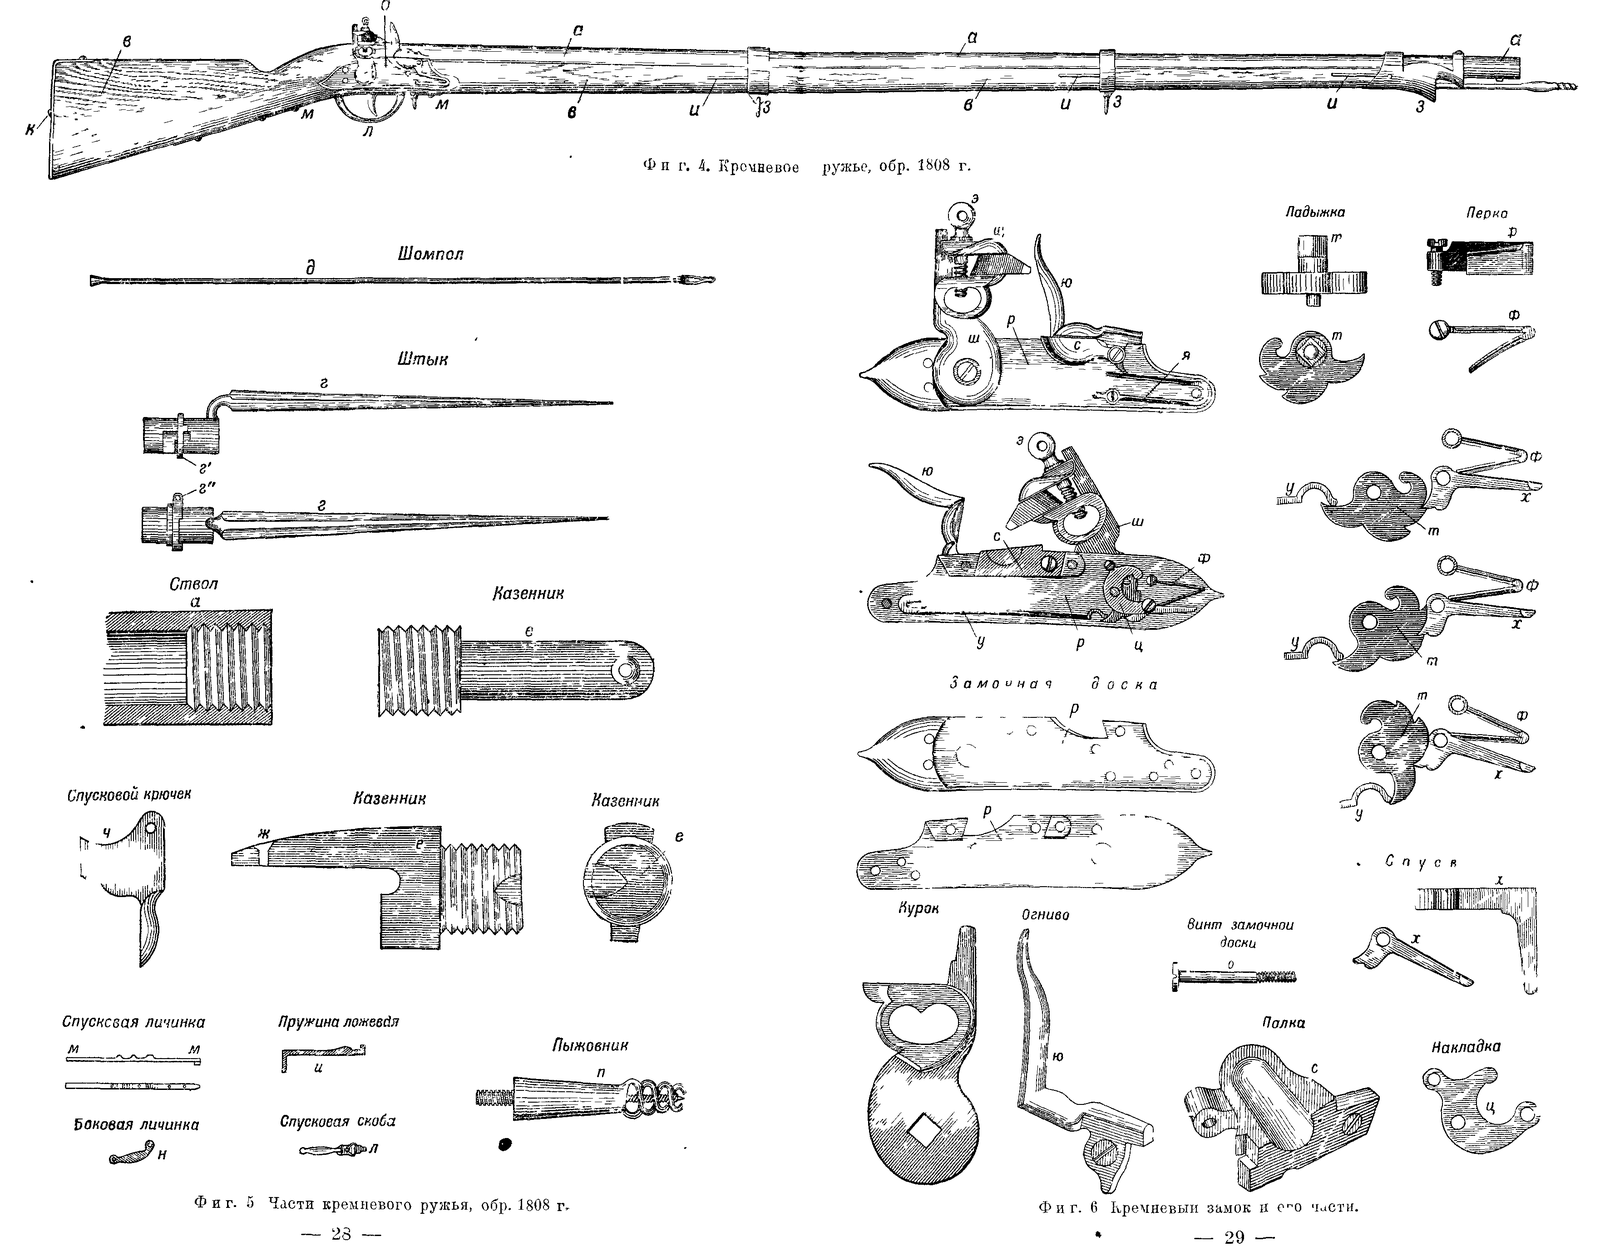 From a musket to a machine gun - a crazy century (Part 1) - Copy-paste, Geektimes, , Weapon, History of creation, Story, CONNECTING PIPE, Musket, Video, GIF, Longpost